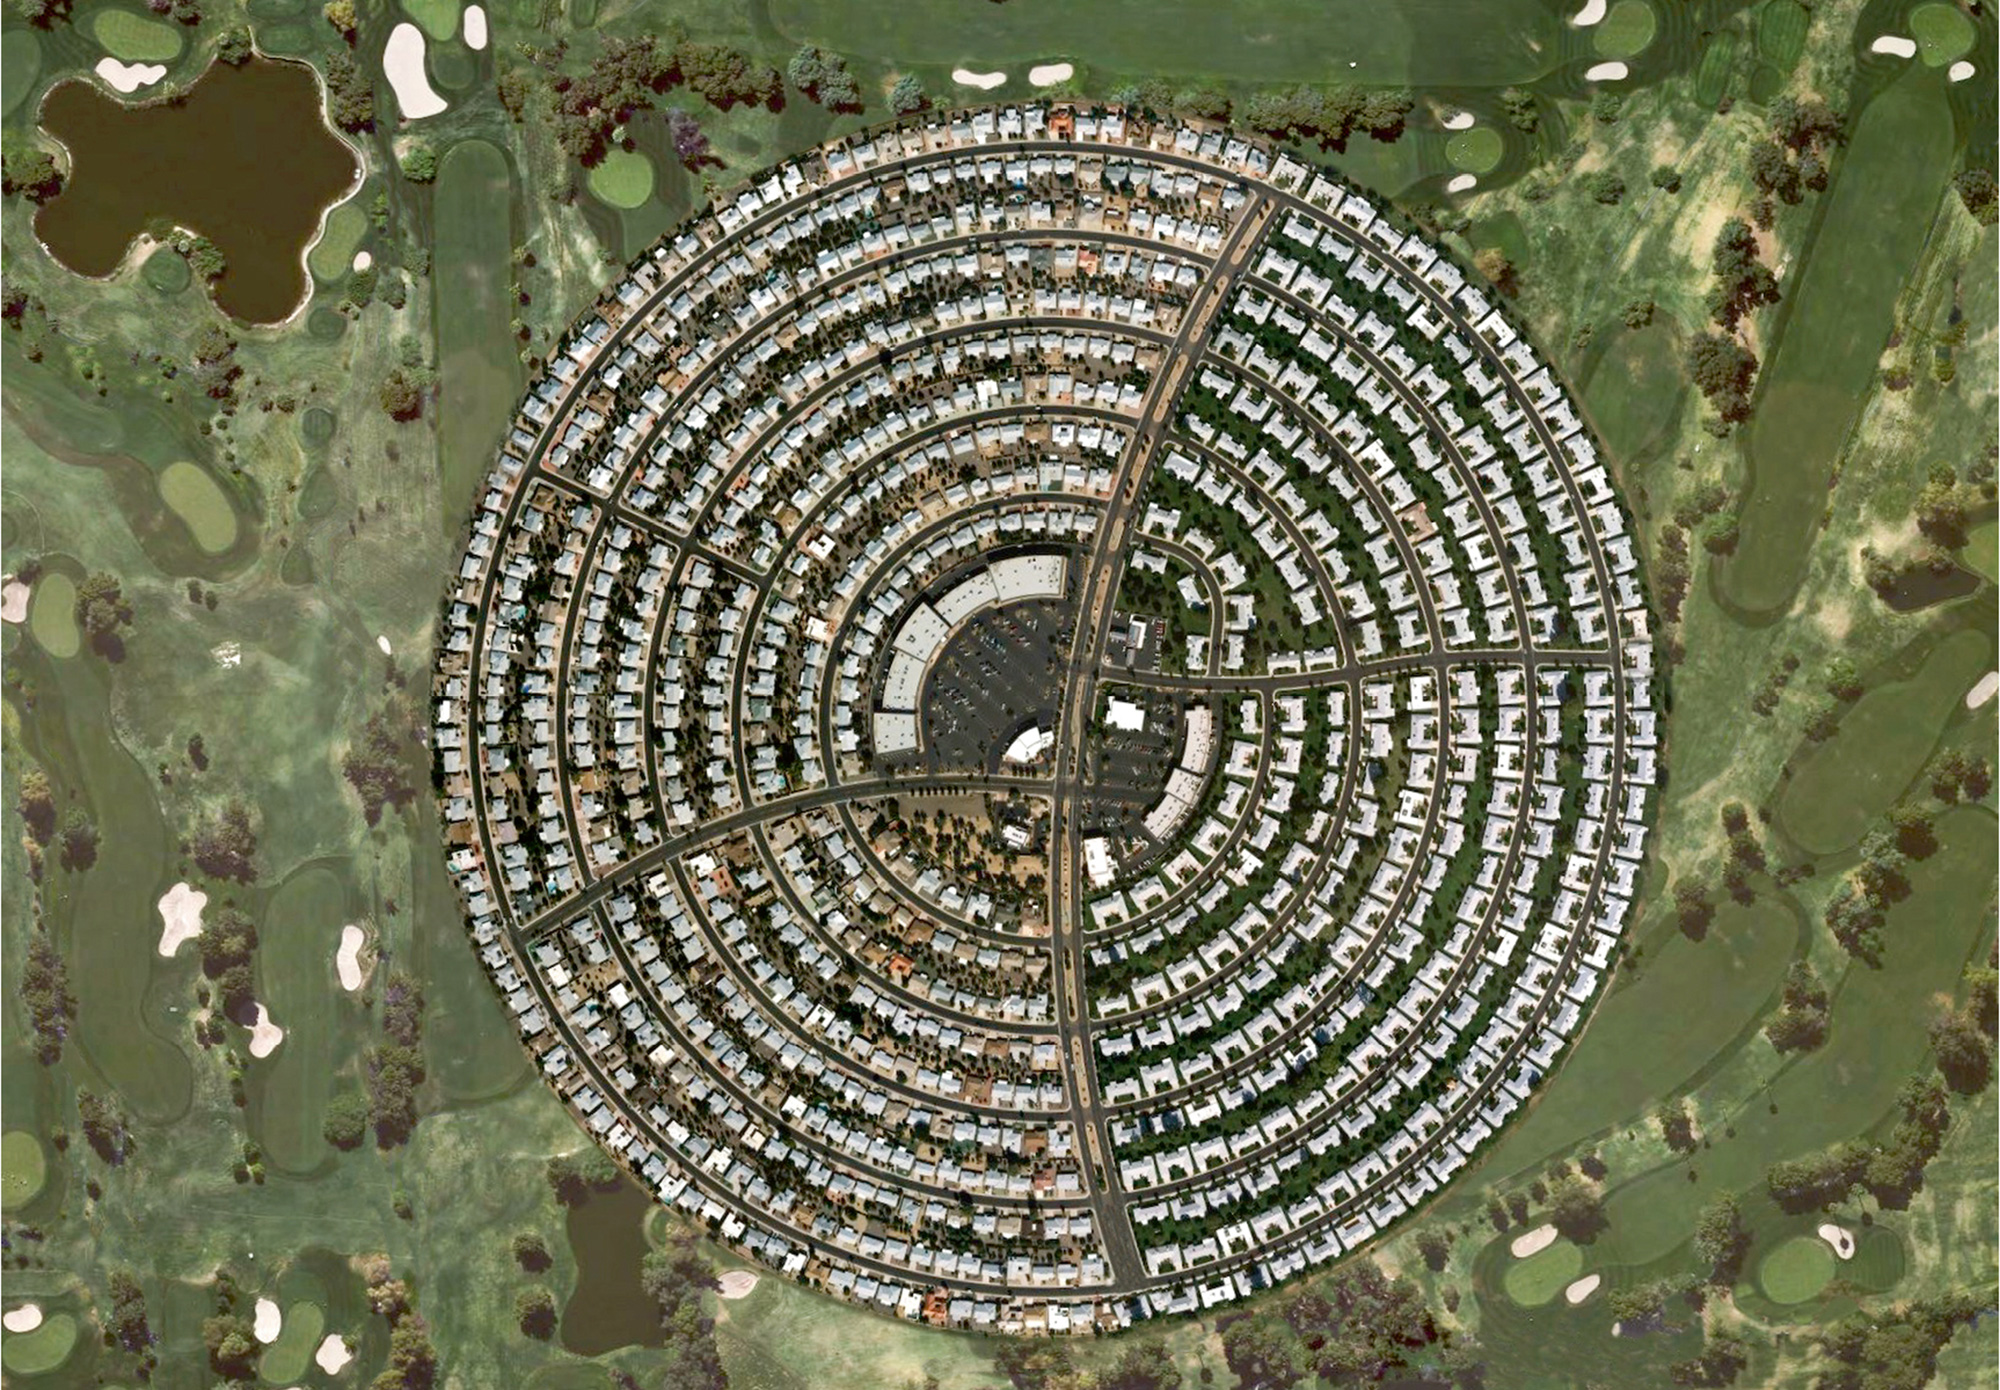 An altered aerial photograph by Jeremy Drummond of a planned housing community in Arizona.